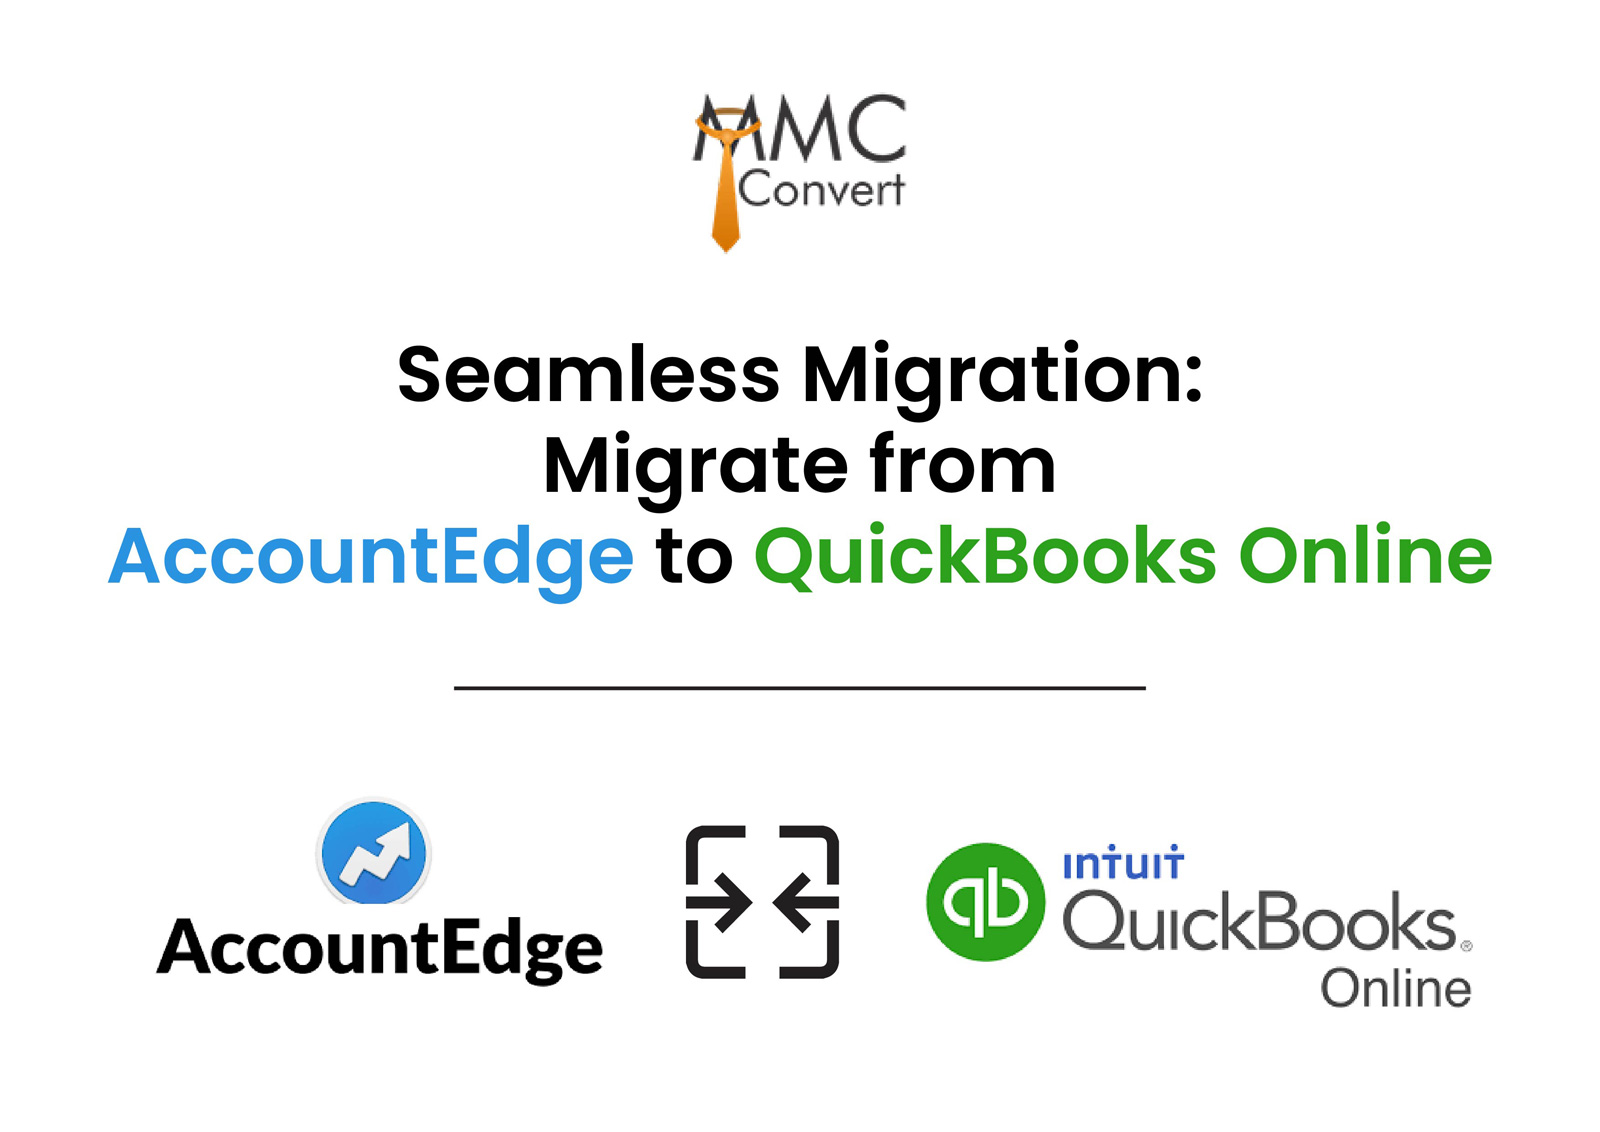 Seamless Migration: Migrate from AccountEdge to QuickBooks Online